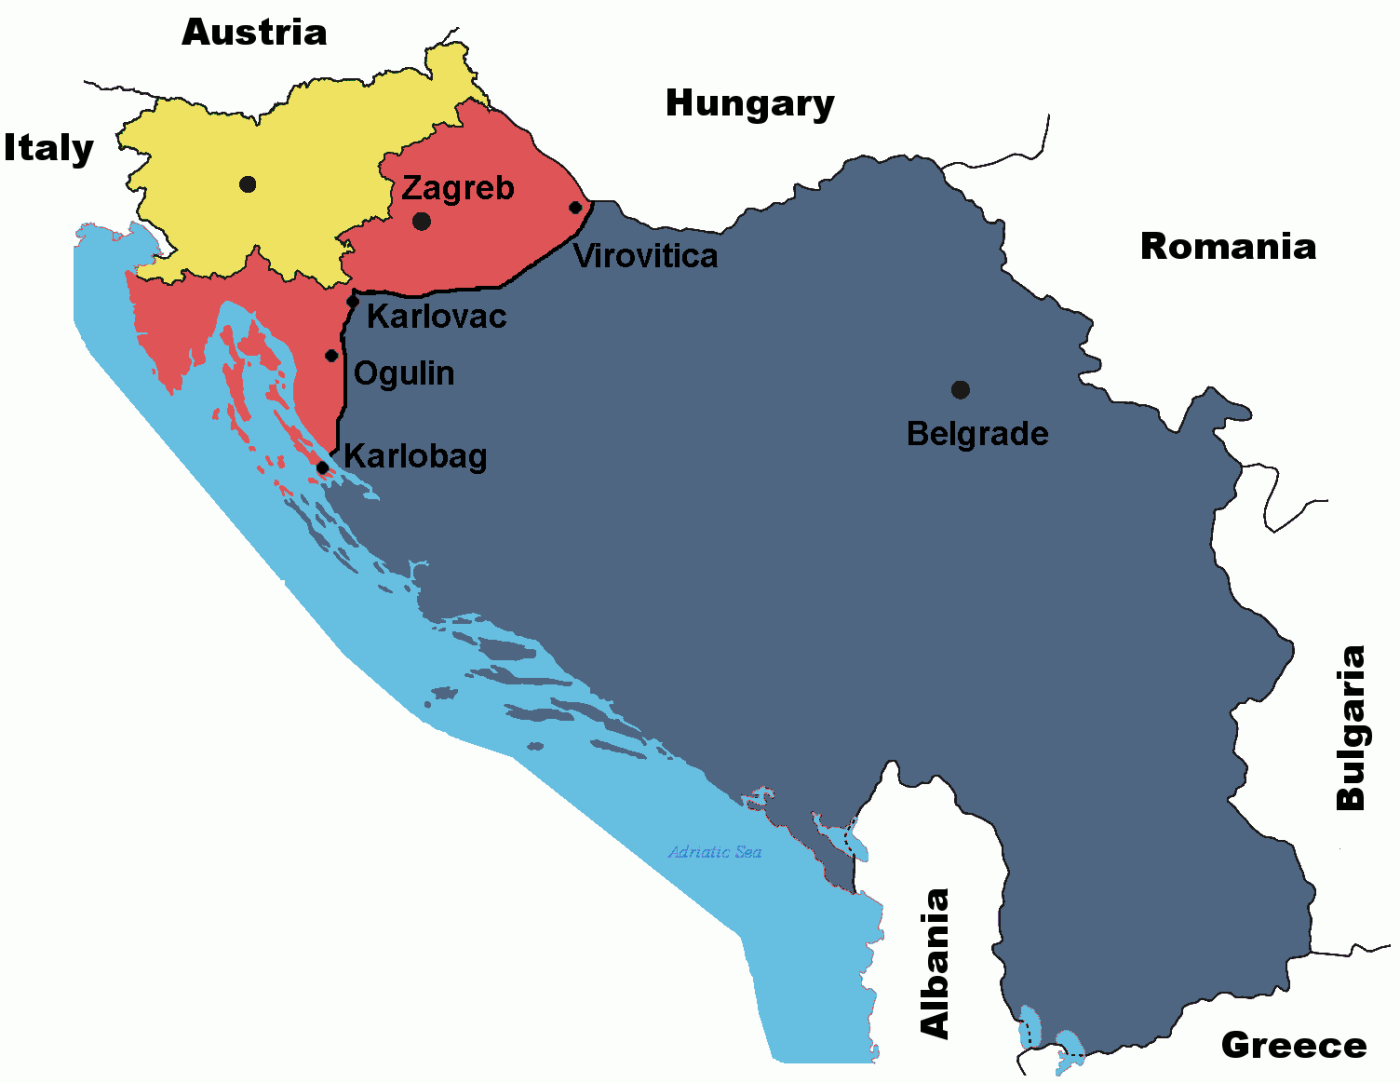 One of the visions of Greater Serbia